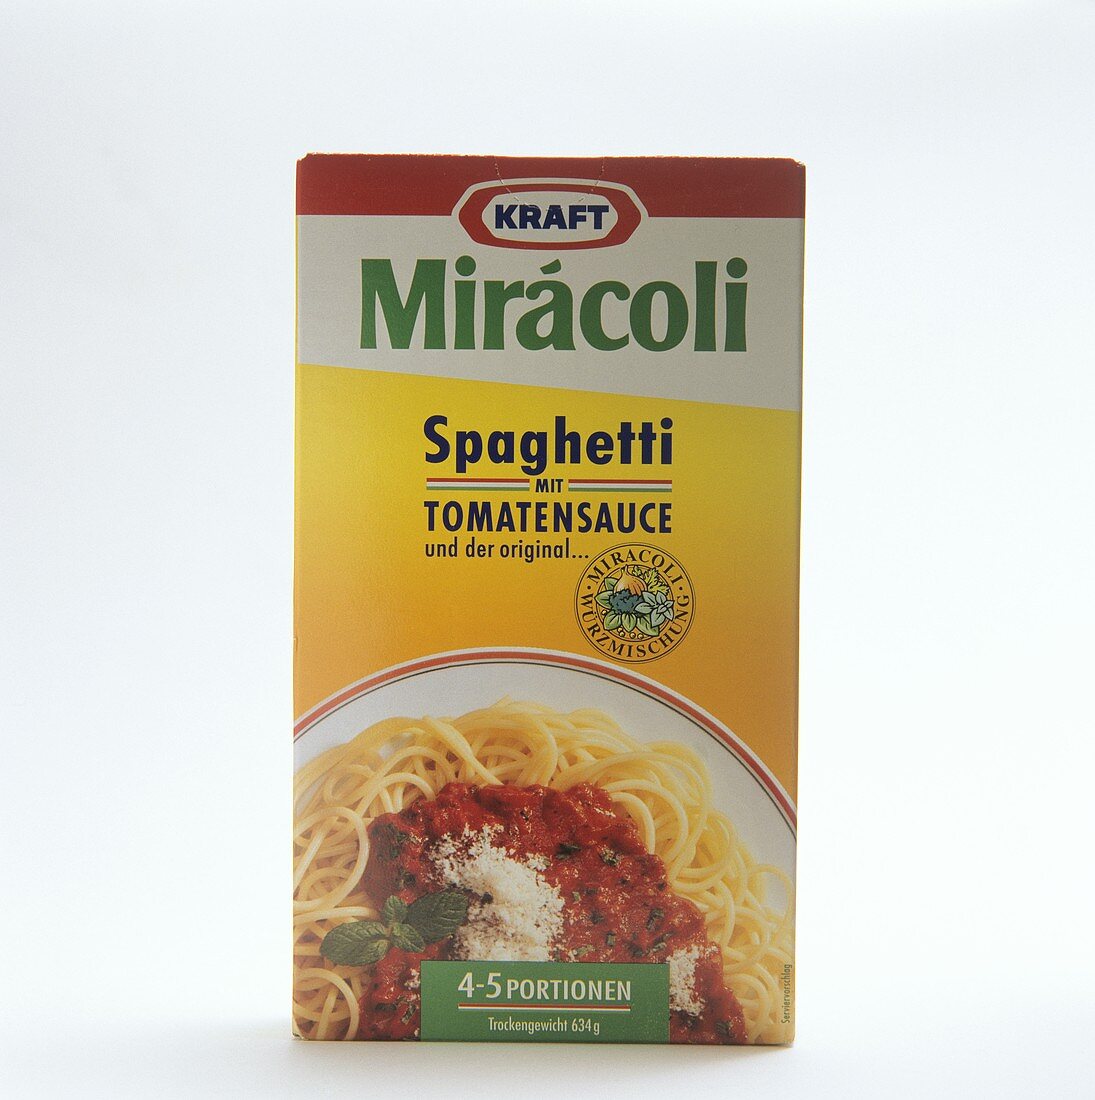 A large pack of Miracoli spaghetti with tomato sauce